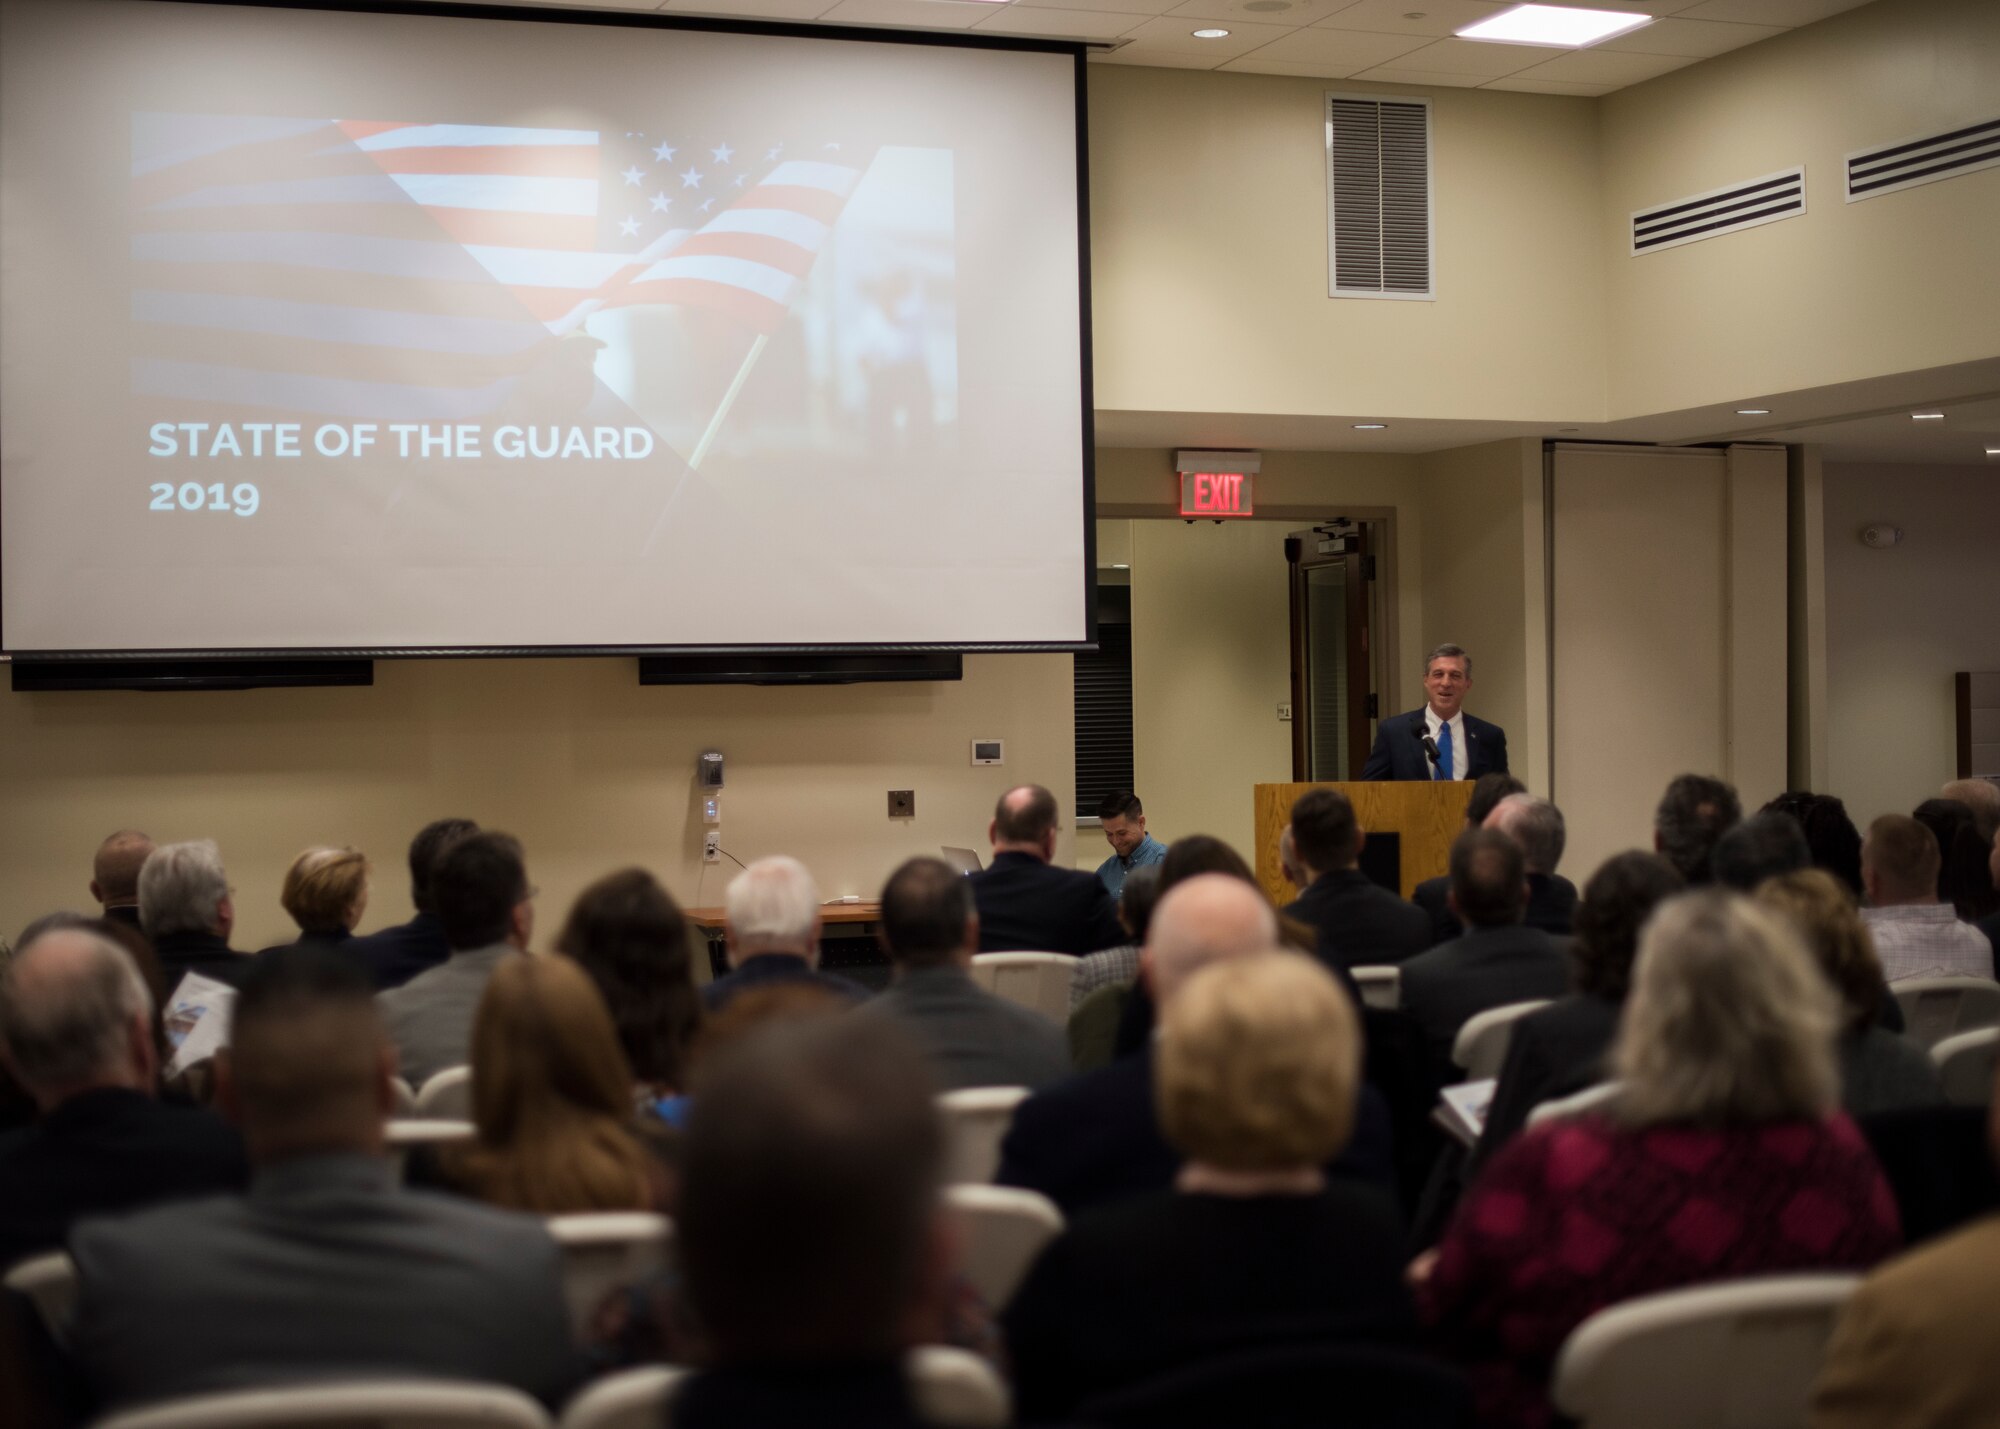 Governor John Carney speaks to attendees during the State of the Guard Event at Joint Force Headquarters, New Castle, Del., Feb. 15, 2019. During the event, members from the Delaware State Chamber of Commerce and the New Castle County Chamber of Commerce joined with members from the Delaware National Guard to discuss current missions, activities and operations of the DNG. (U.S. Air National Guard photo by Senior Airman Katherine Miller)